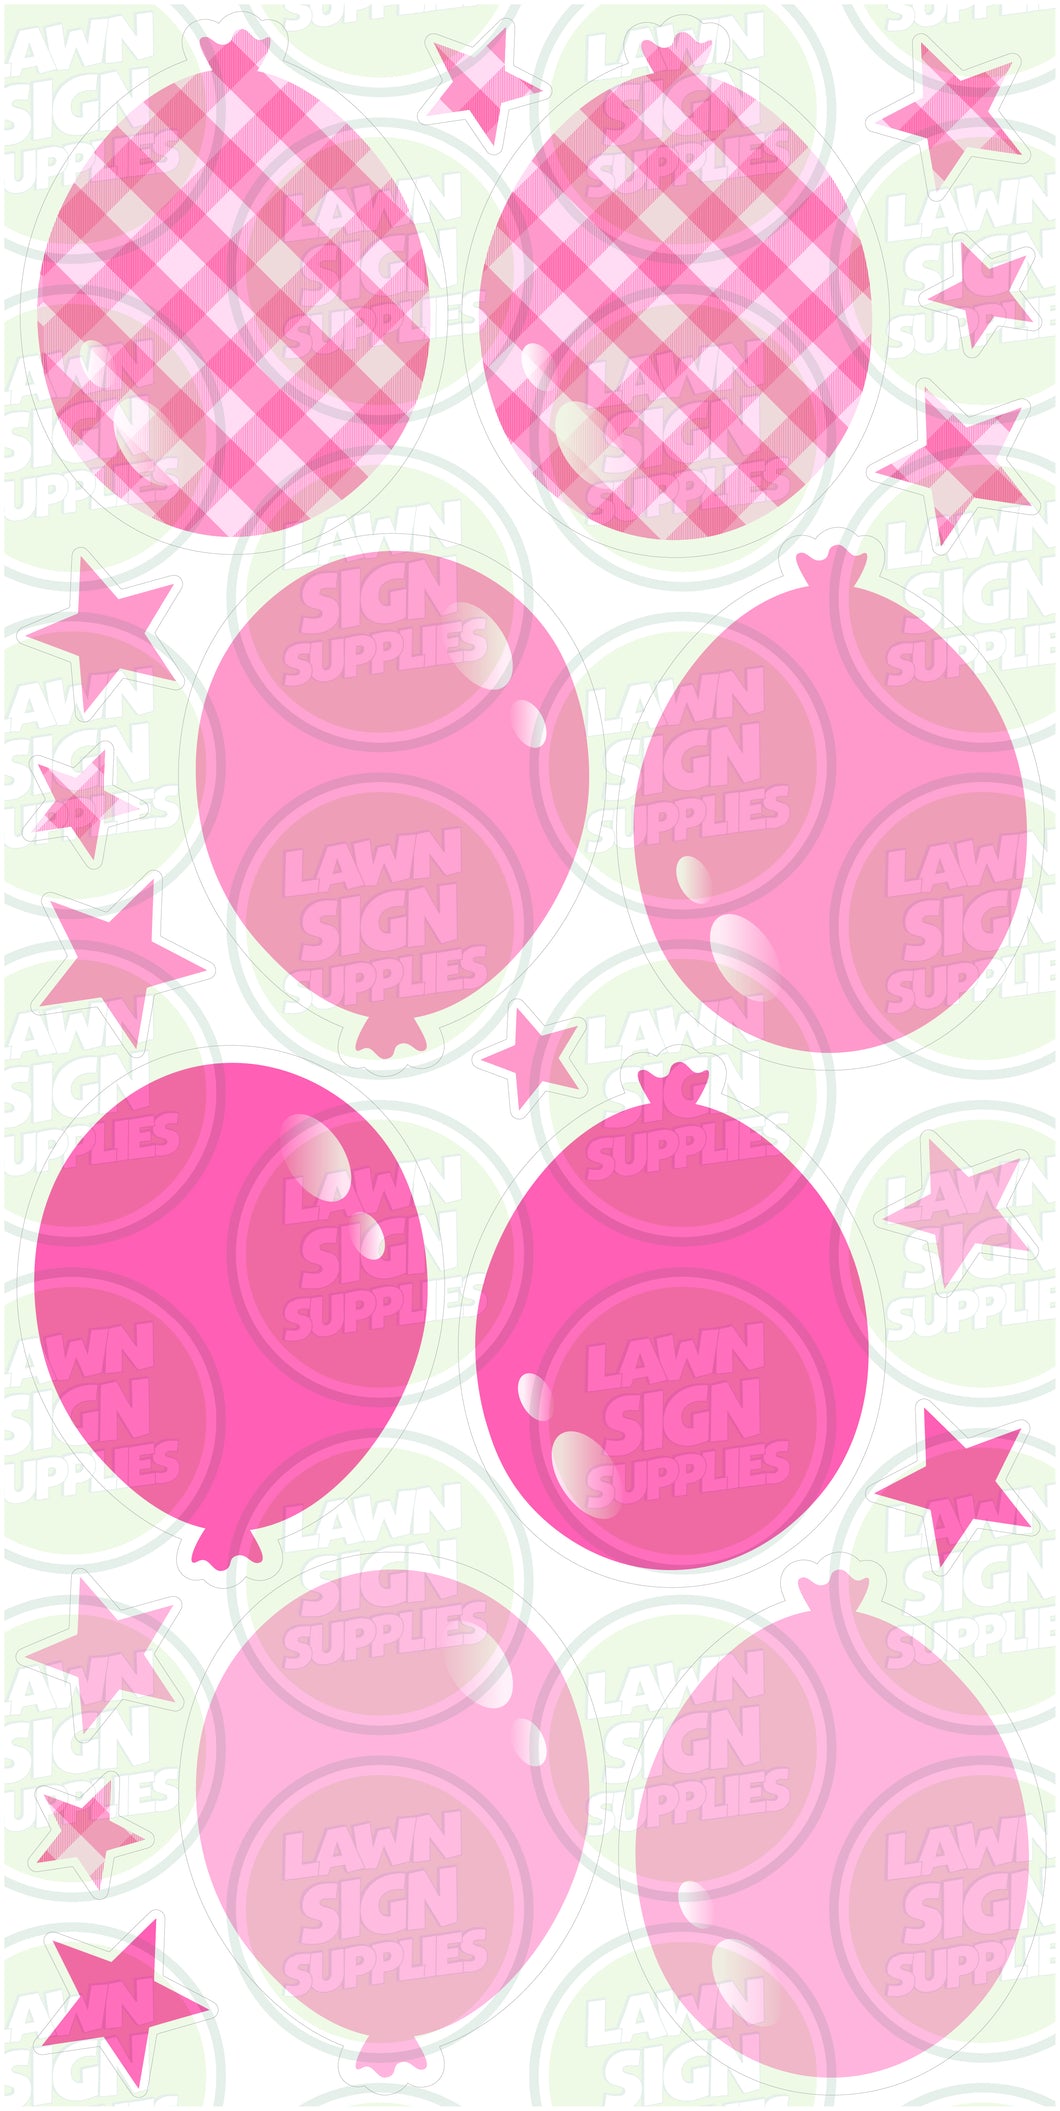 BALLOONS COMBO - PINK MIX & PINK GINGHAM